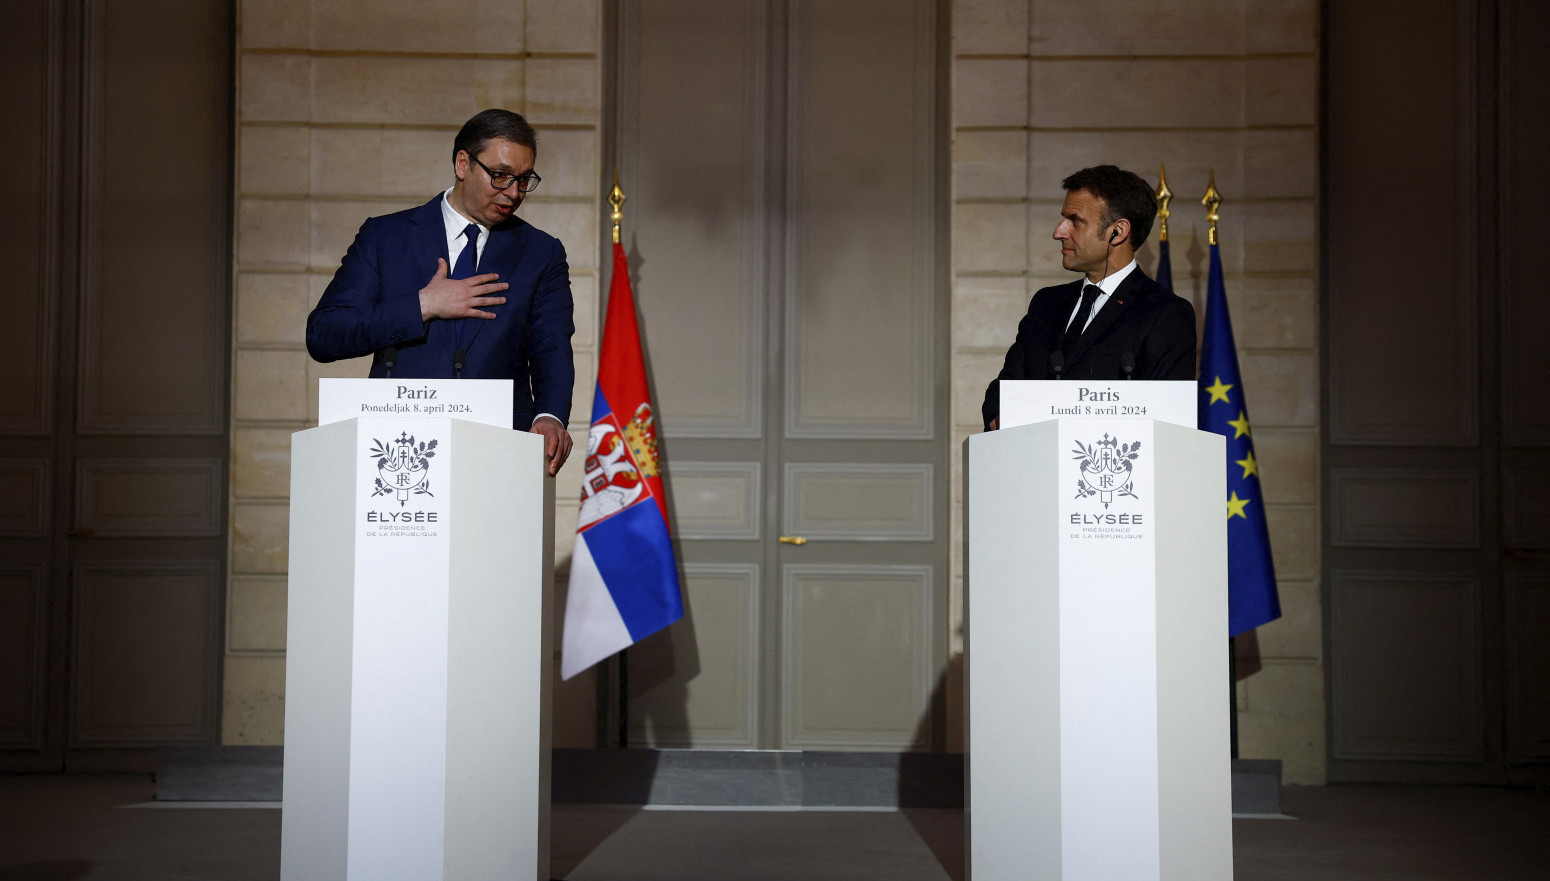 The second day of the visit to France; Vučić met with the Minister of Defense of France